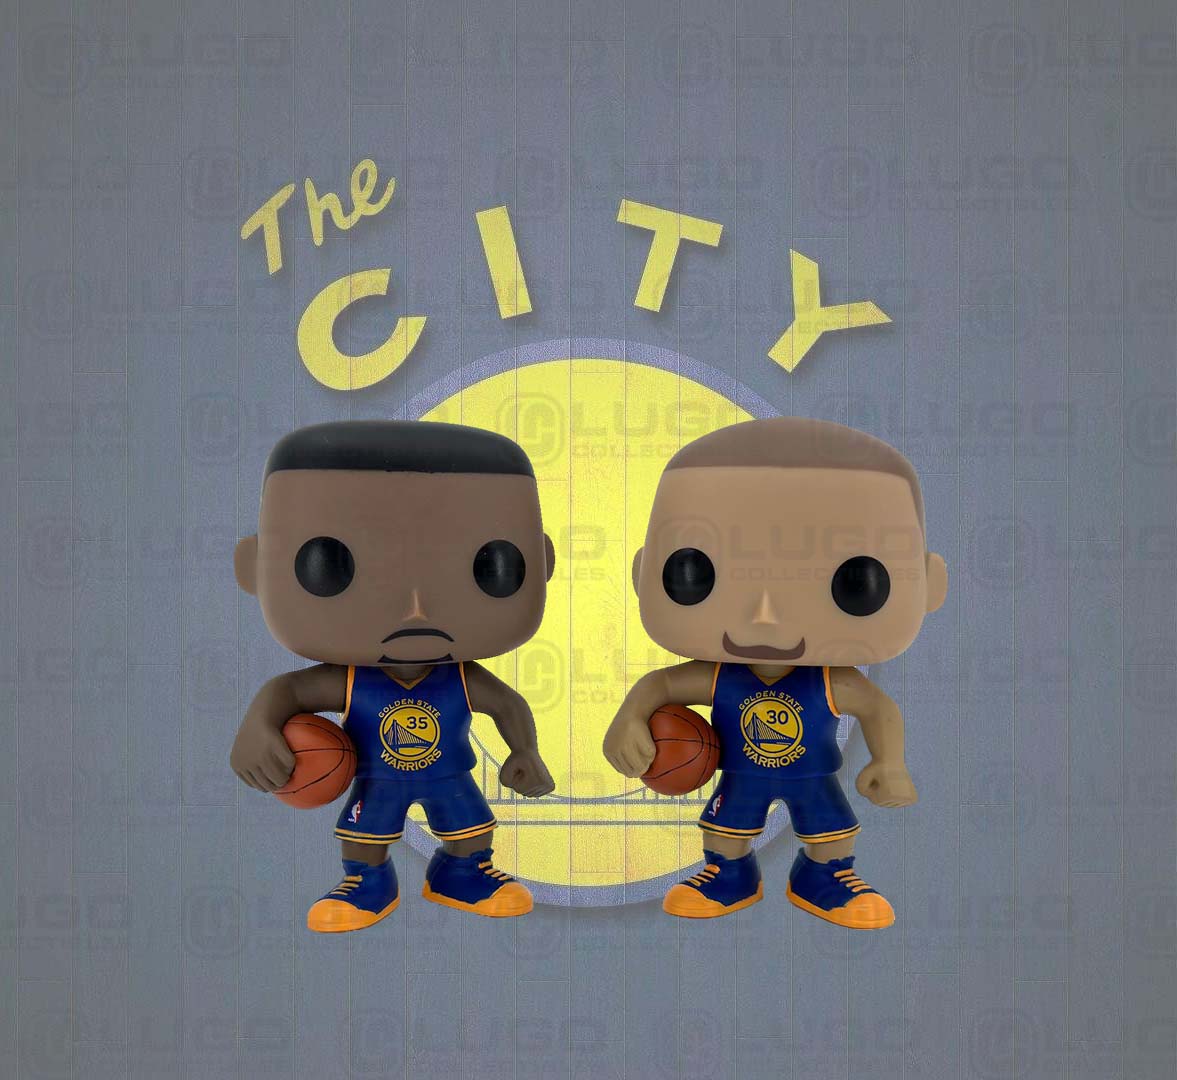 Funko POP! Sports NBA Kevin Durant & Stephen Curry 2-pack Asia Exclusi –  Lugo Collectibles